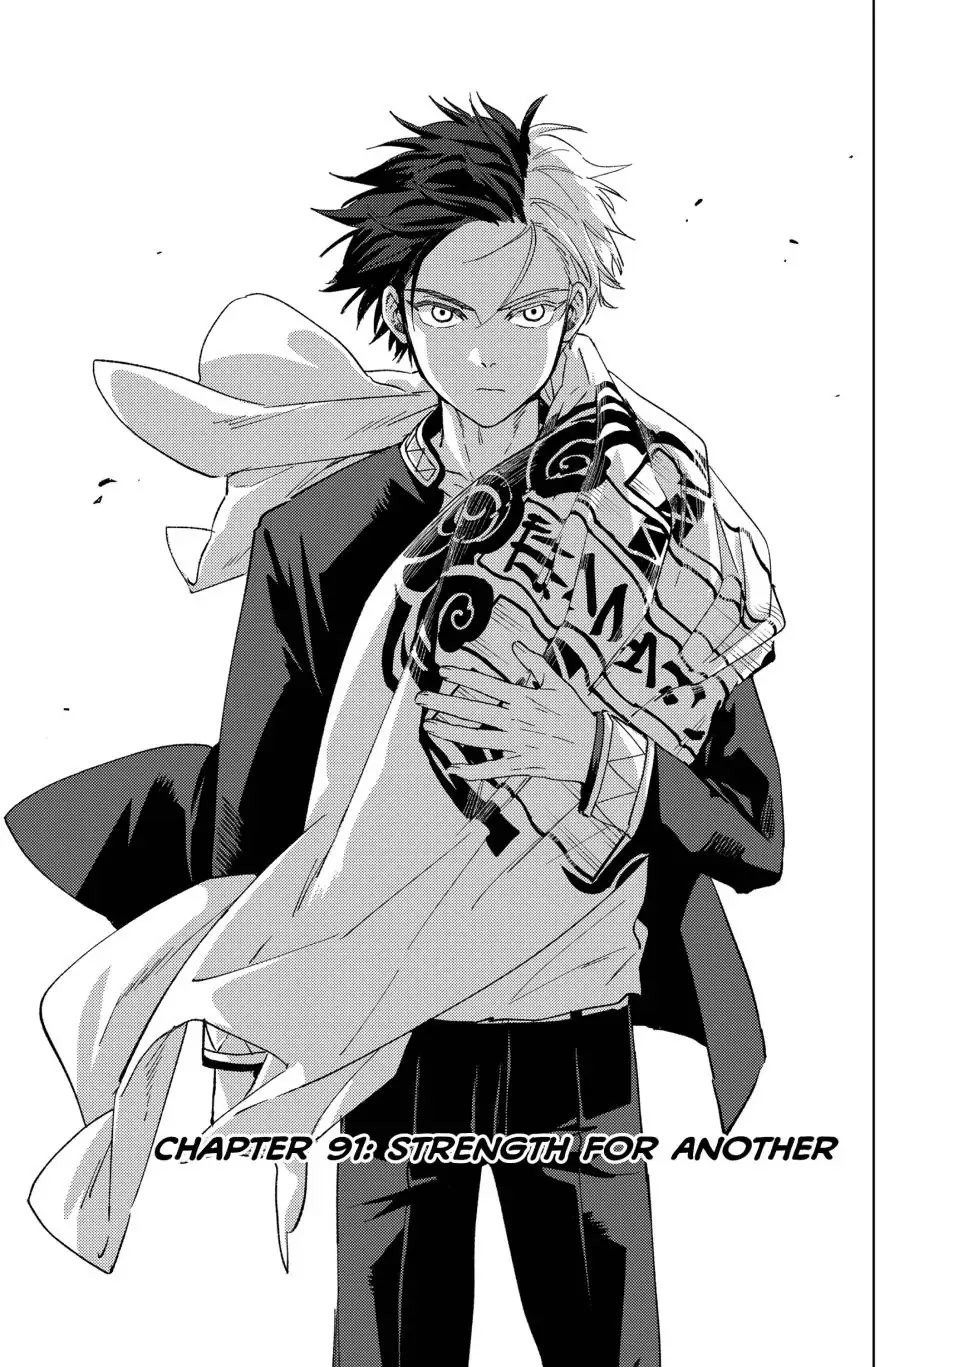 Wind Breaker (Nii Satoru) Chapter 91: Strength For Another - Picture 1